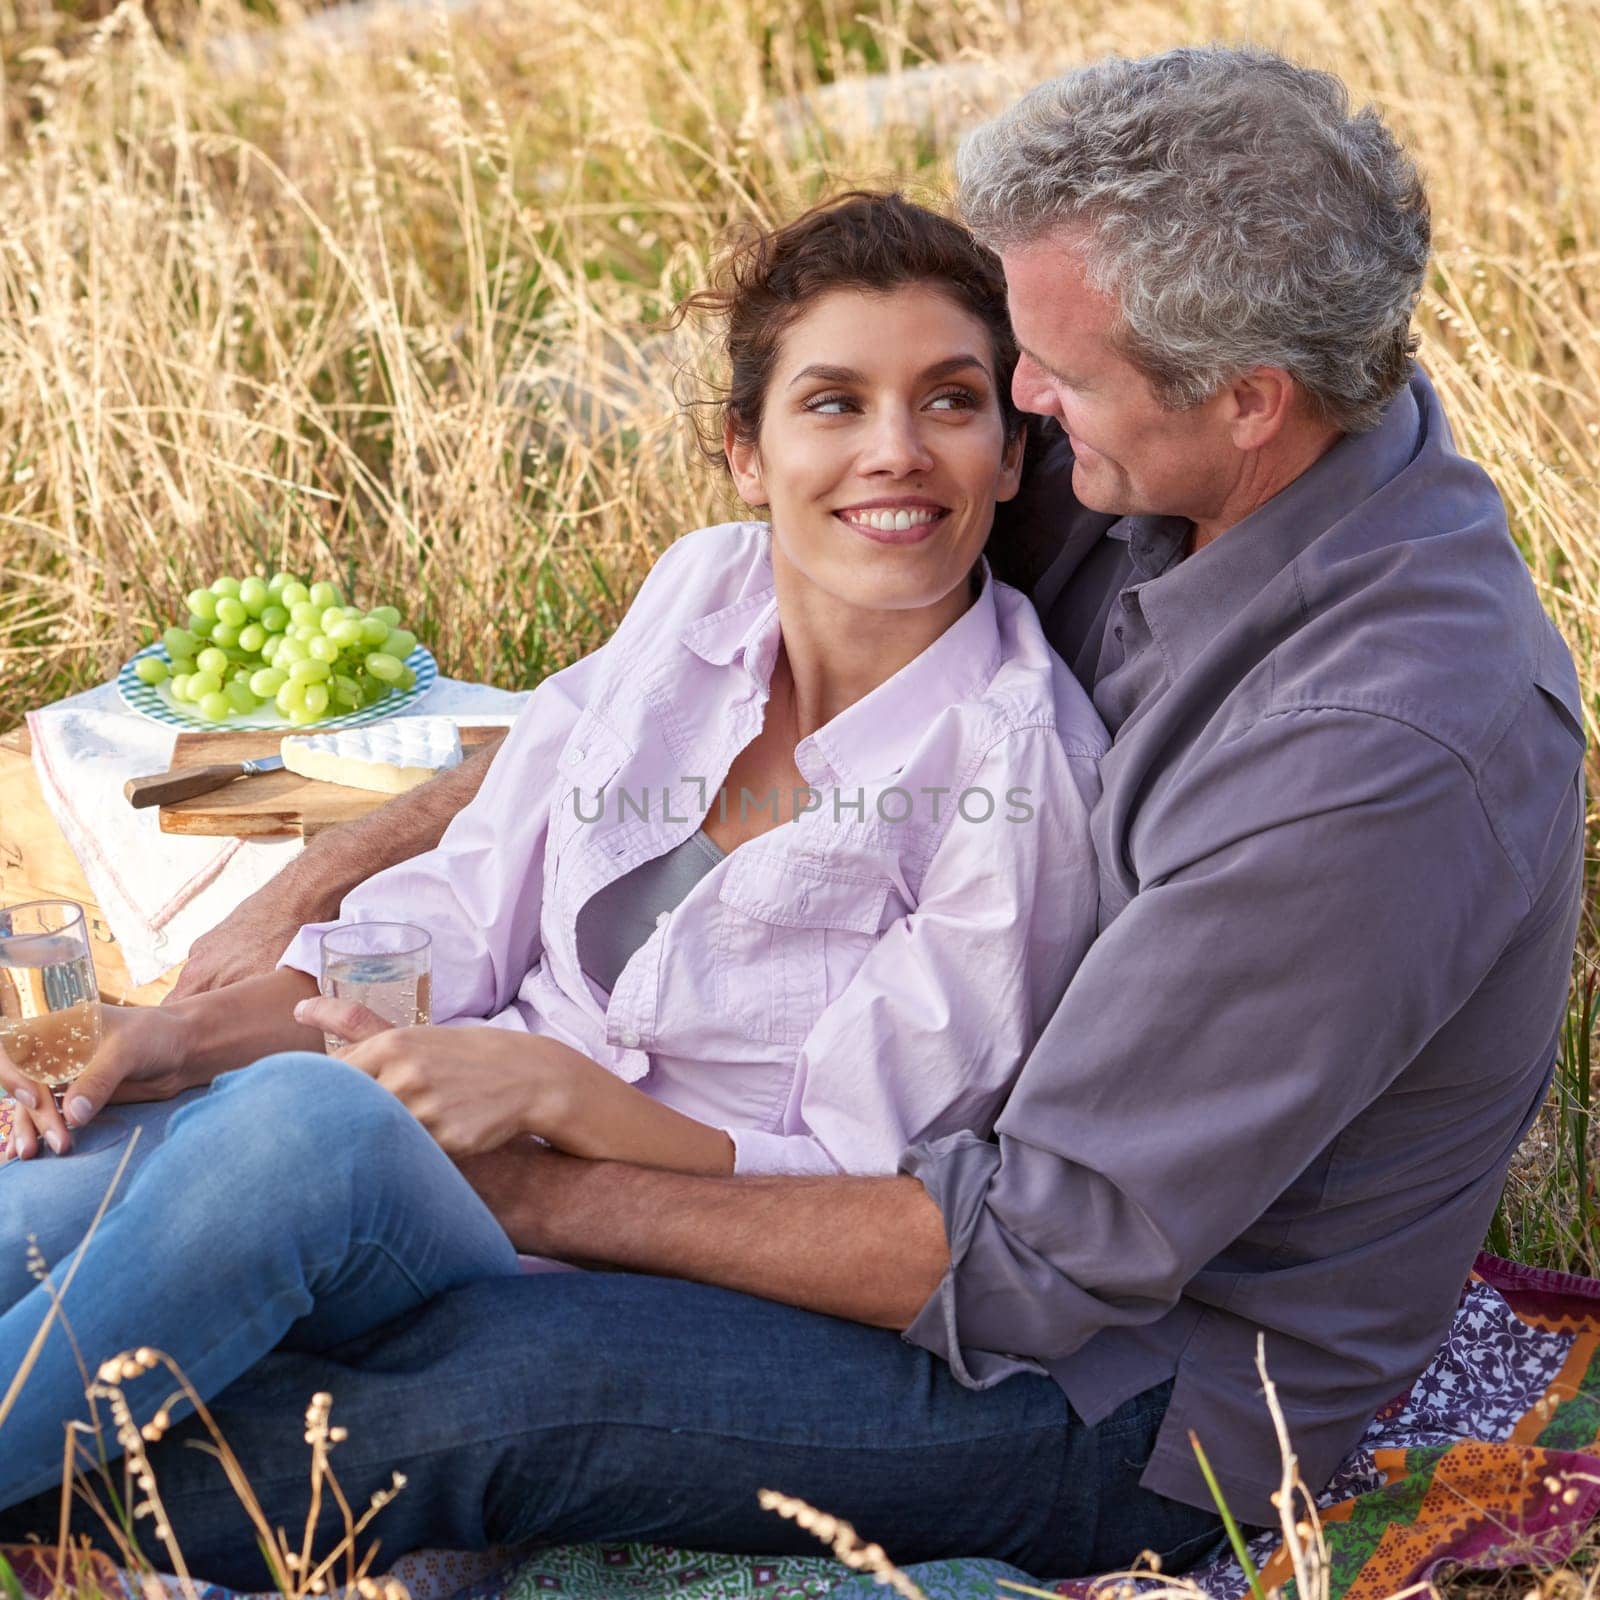 Mature couple, date and picnic in park to relax with love, care or support in marriage. Outdoor, man and embrace woman on grass in nature with food, drinks or celebration together on vacation.